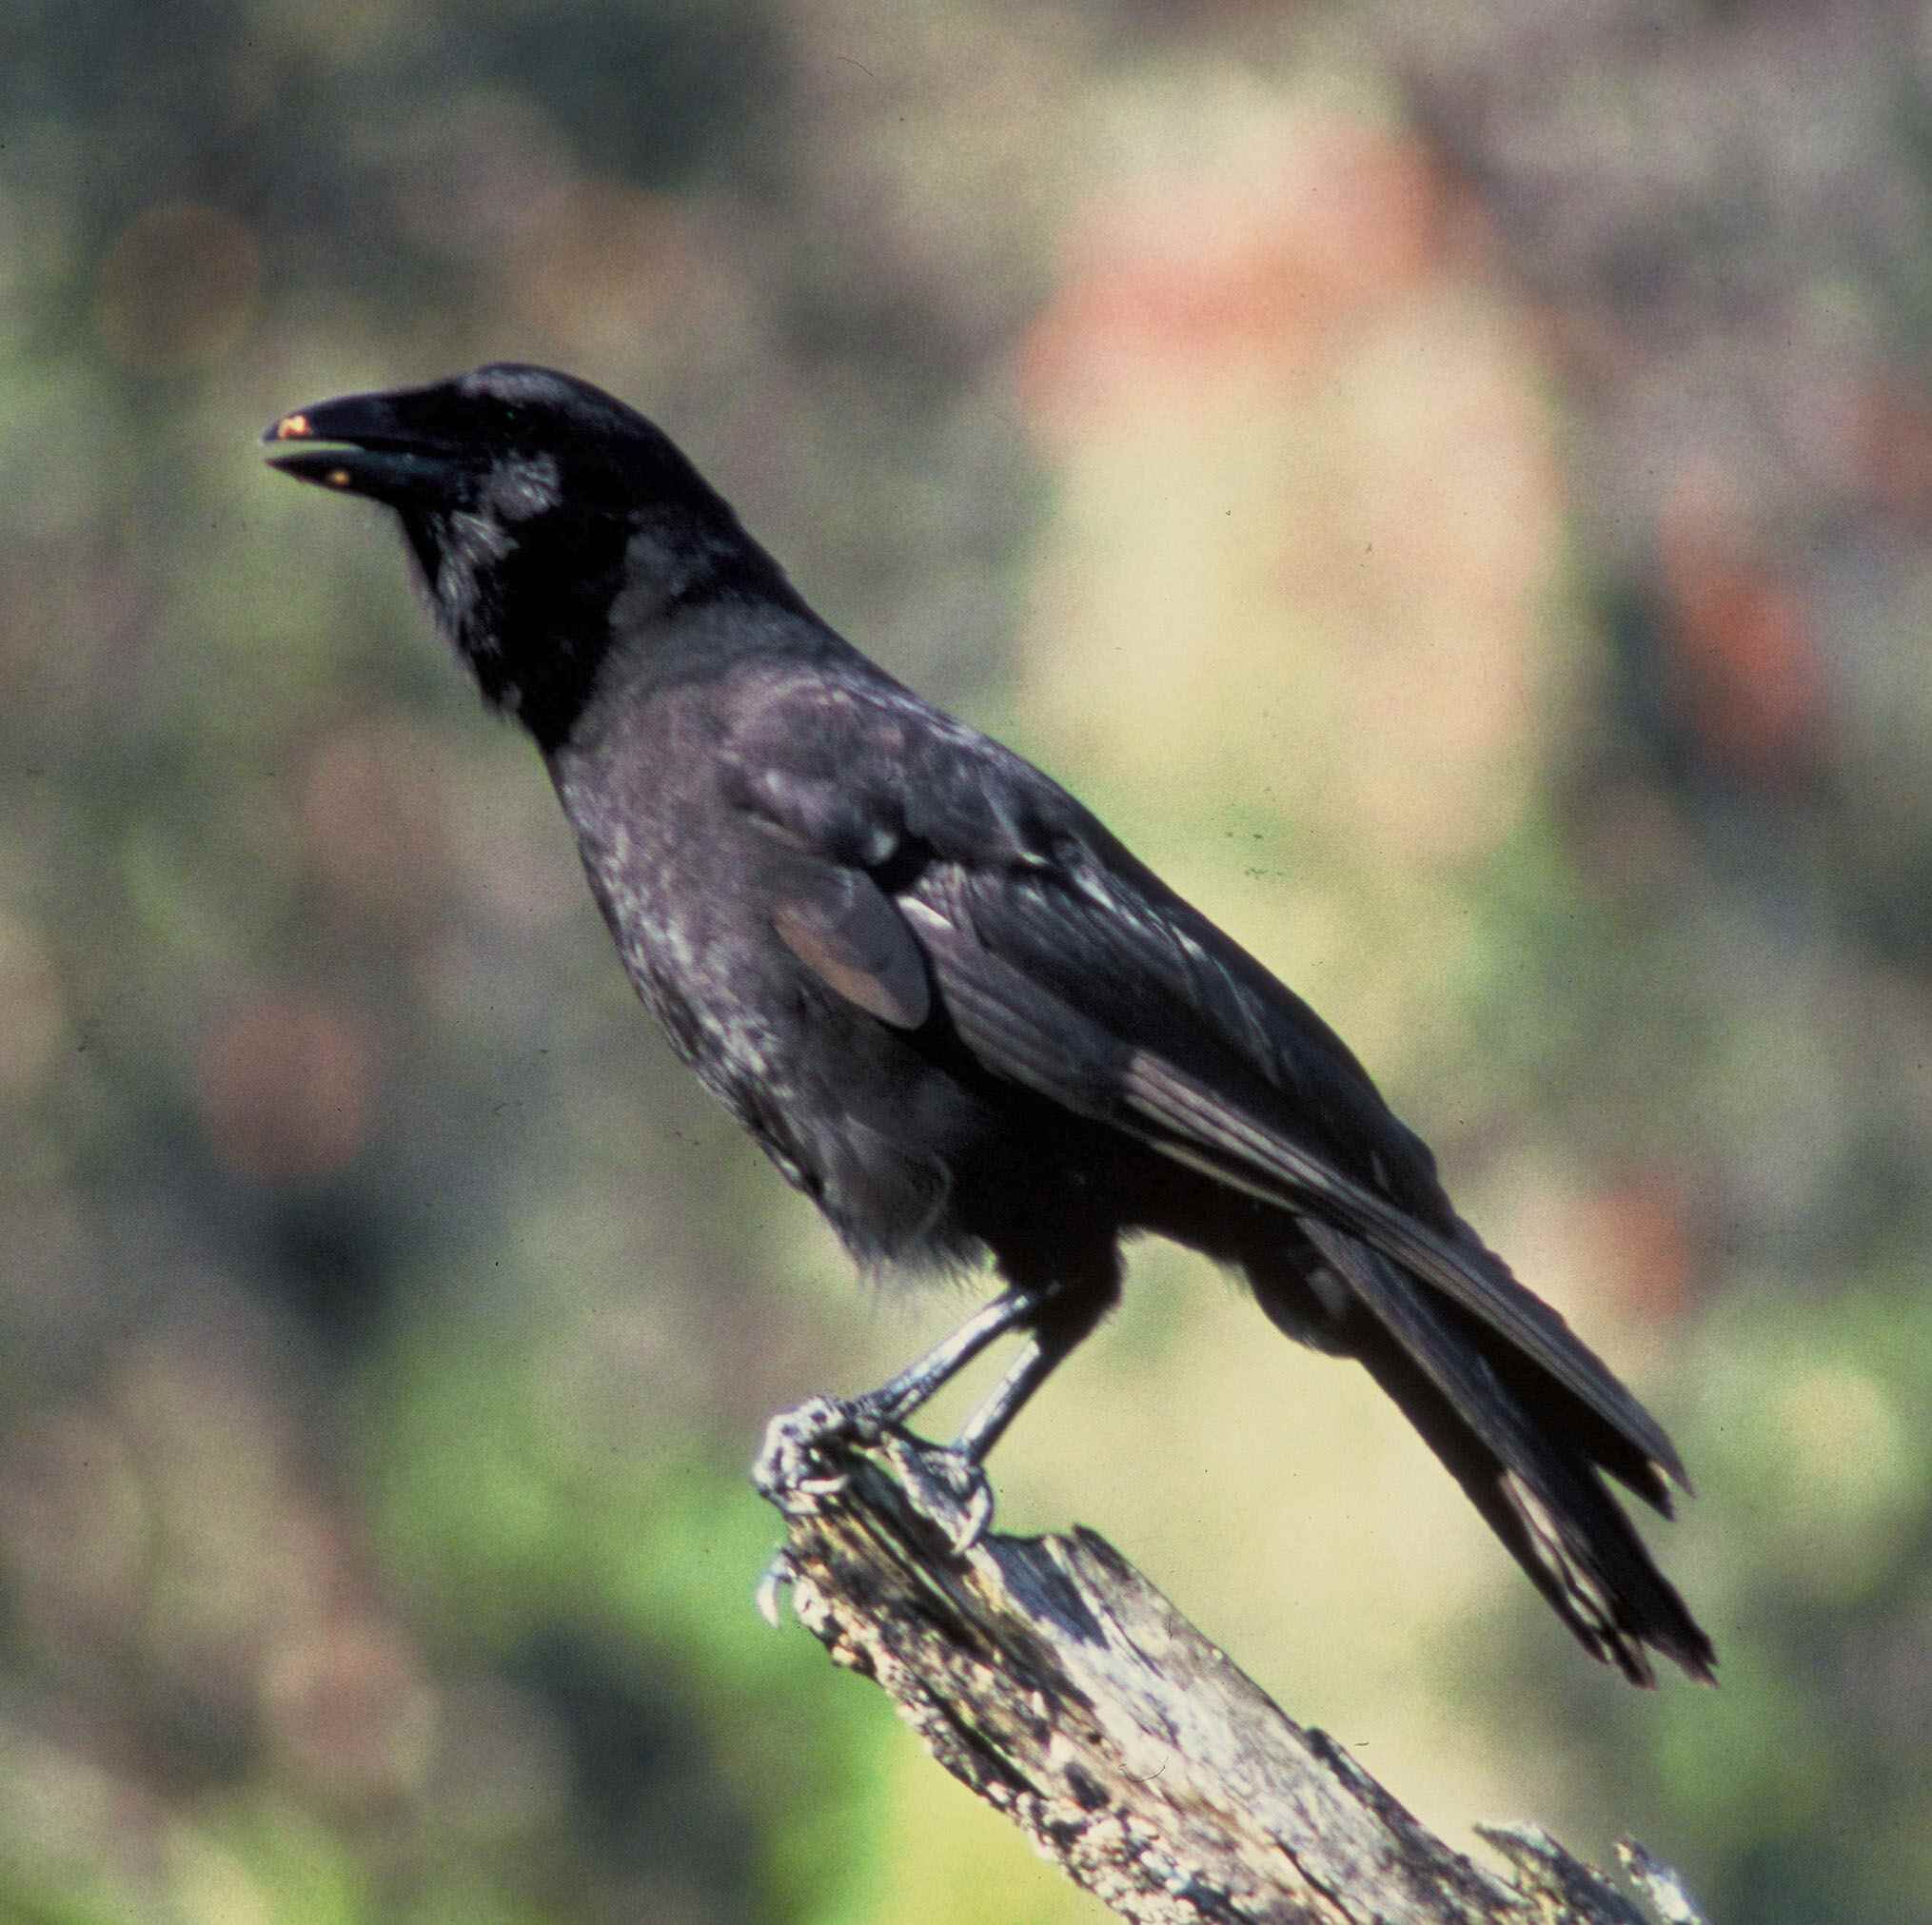 Bird brains: Public asked to look out for clever rooks - BBC News